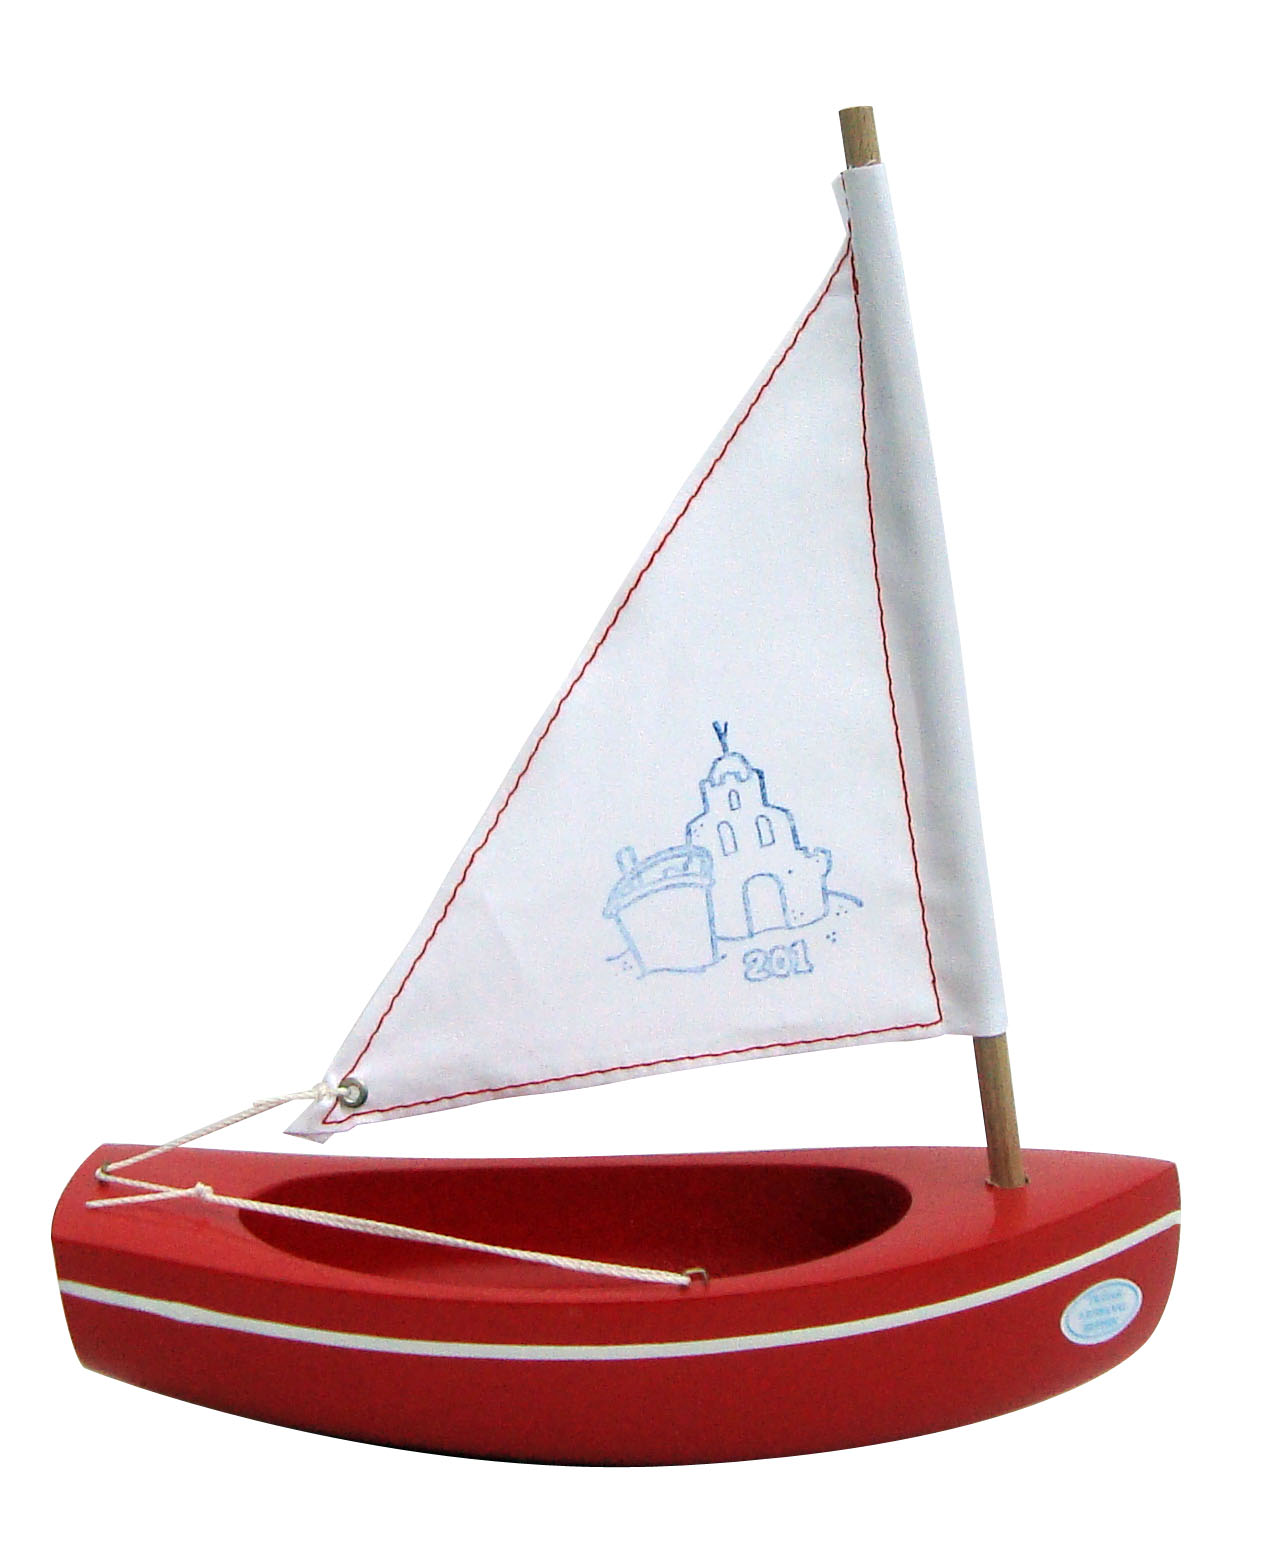 small wooden toy sailboats